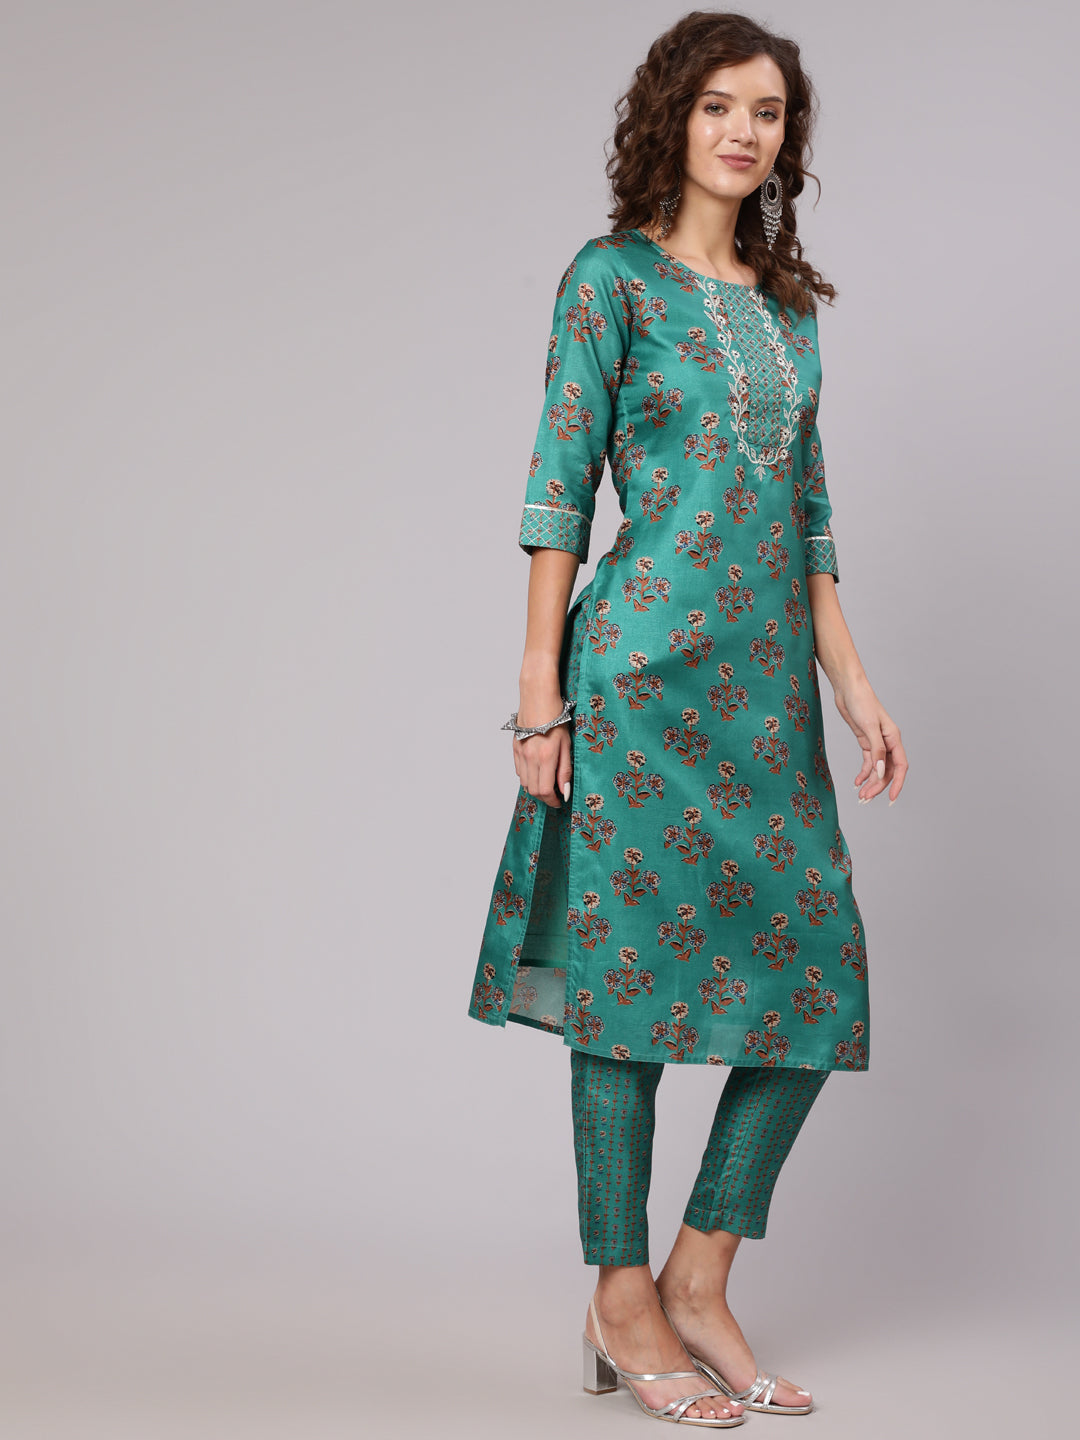 Sea Green Tussar Silk Kurta Has Round Neck, Zari Work In Front Yoke , Three Fourth Sleeves Has Gota Lace, Side Slit, Straight Hem, Cotton Mulmul Lining Attached To It, Printed Silk Blend Palazzo Has Both Side Pocket And Partially Elastic At Waist Ans Has Cotton Mulmul Lining Attached To It., Supernet Printed Dupatta Has Gota Lace All Over The Dupatta.